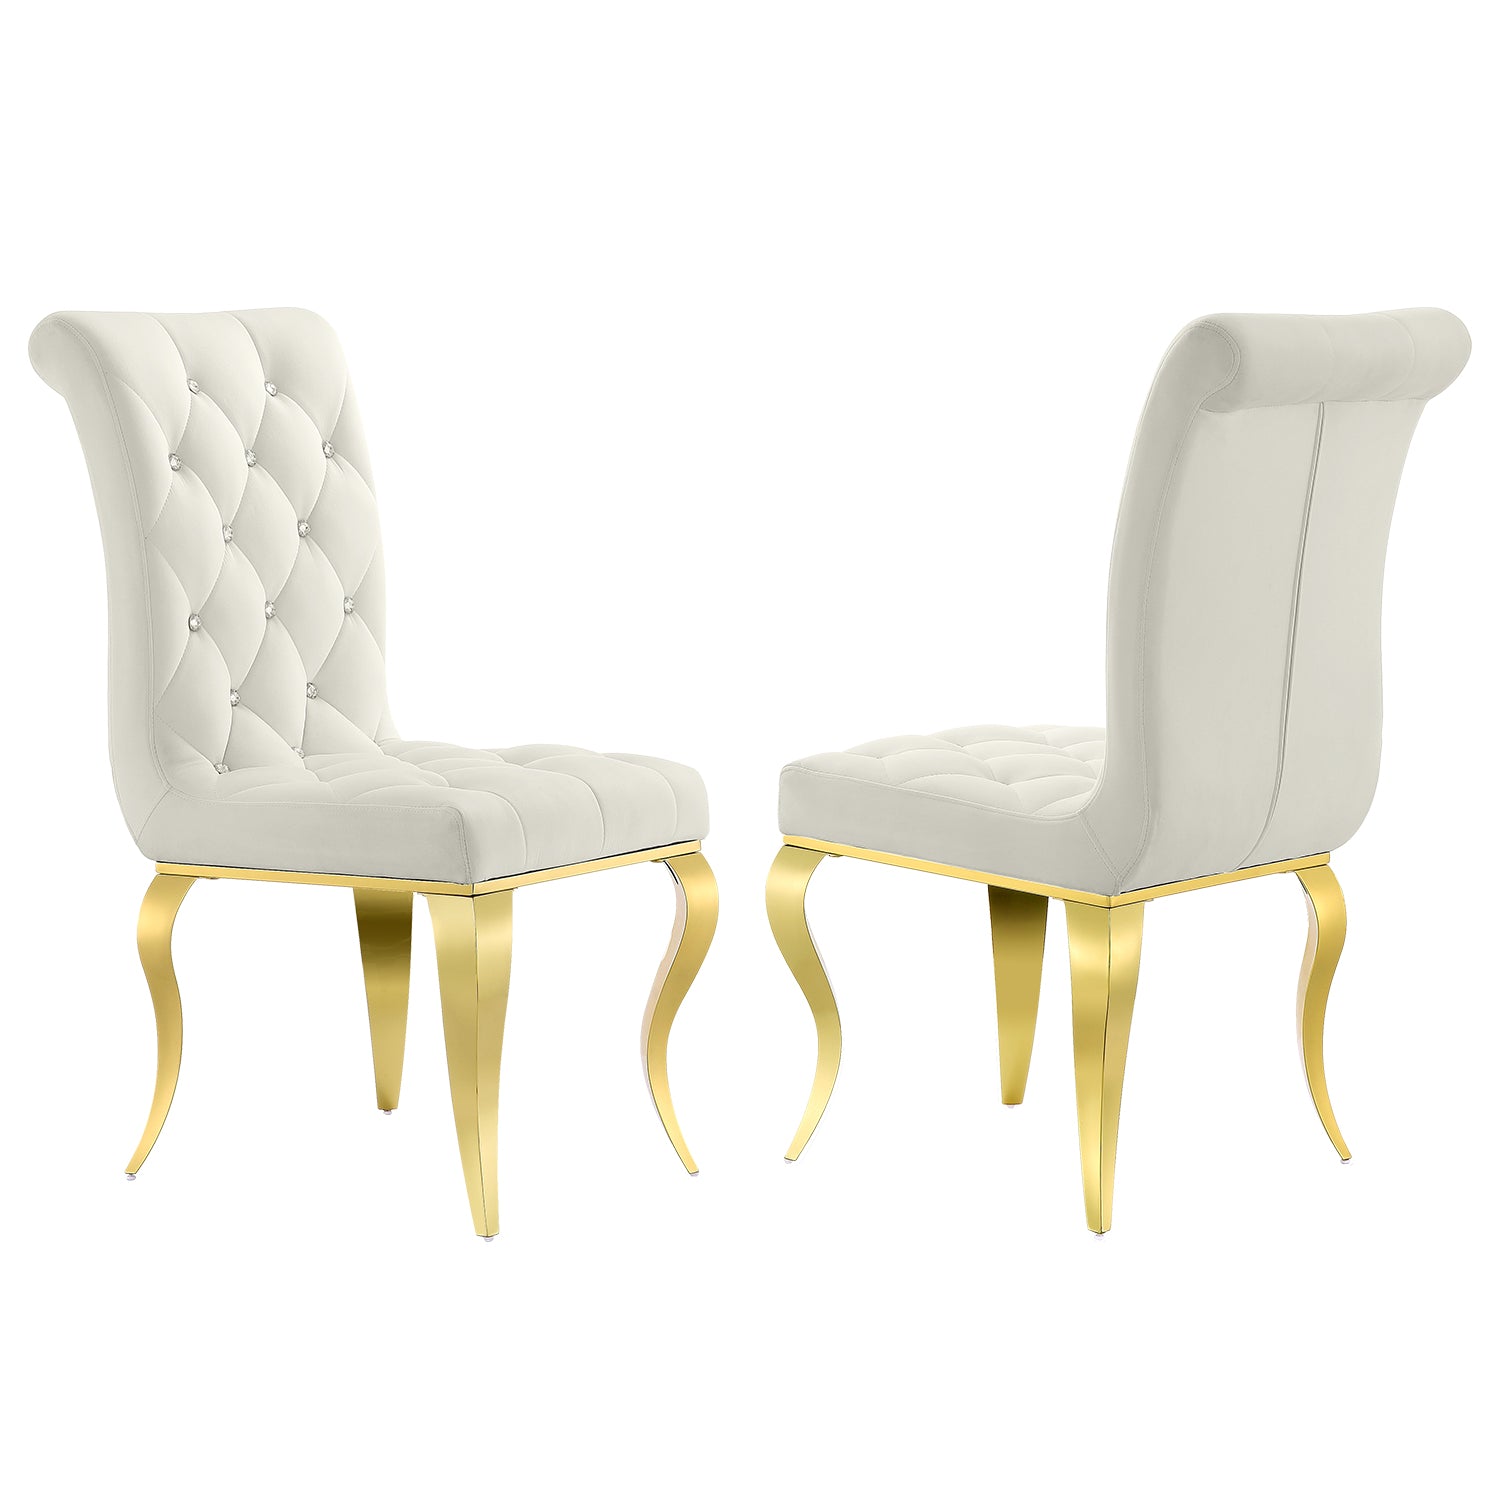 Adding Luxury and Elegance with White and Gold Velvet Dining Chairs